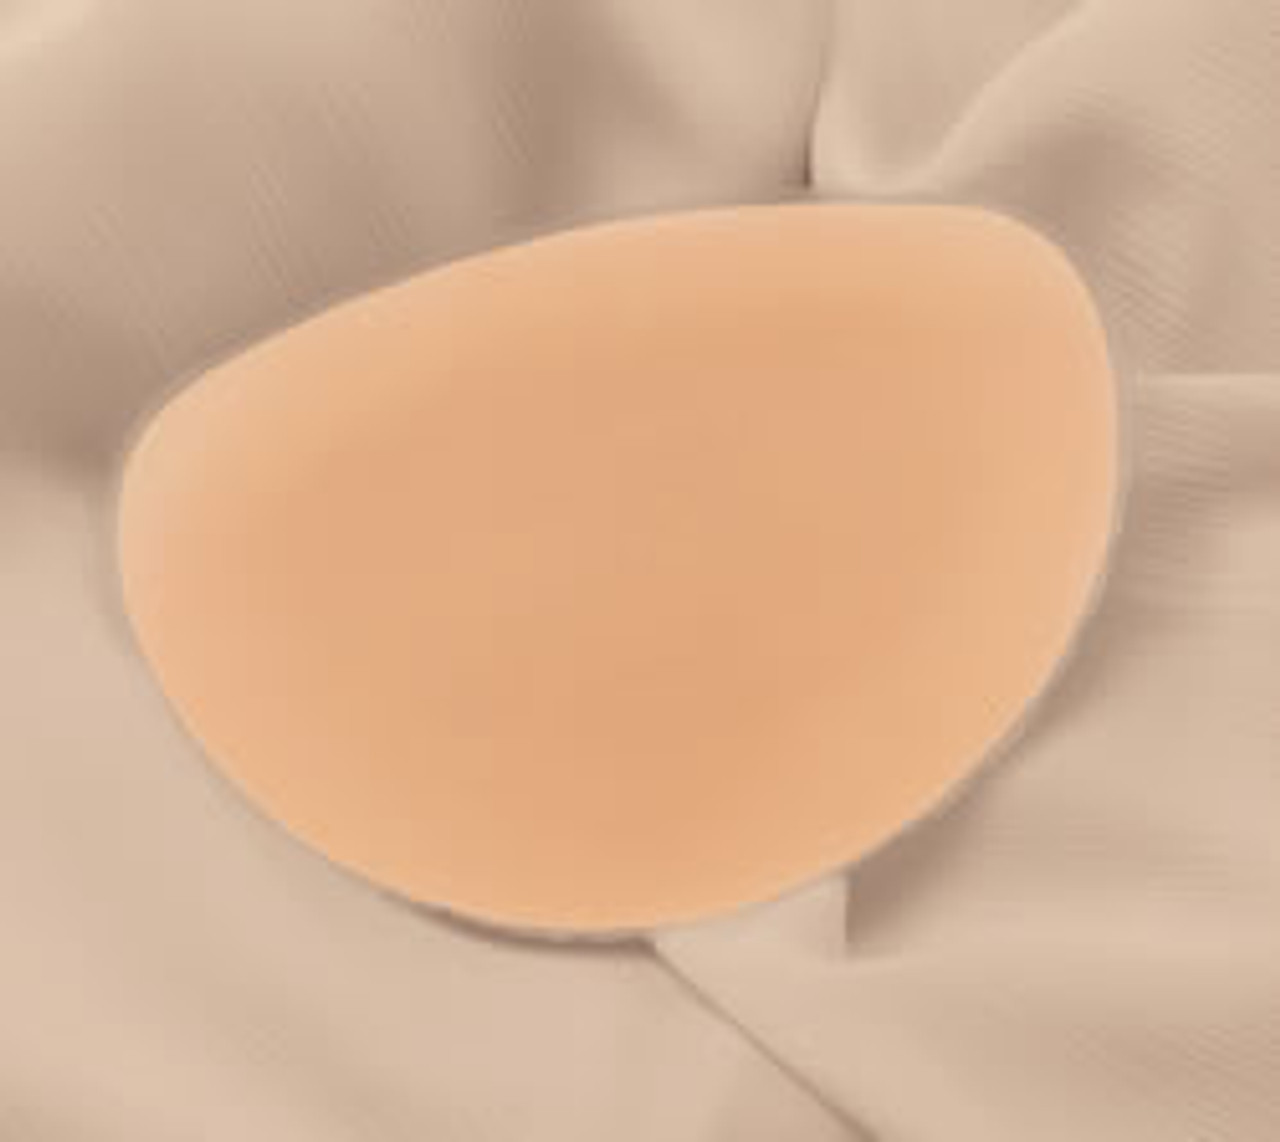  Envy Breast Polyurethane Pads Lumpectomy Perfect Match Enhancer  Breast Pads (XL) : Baby